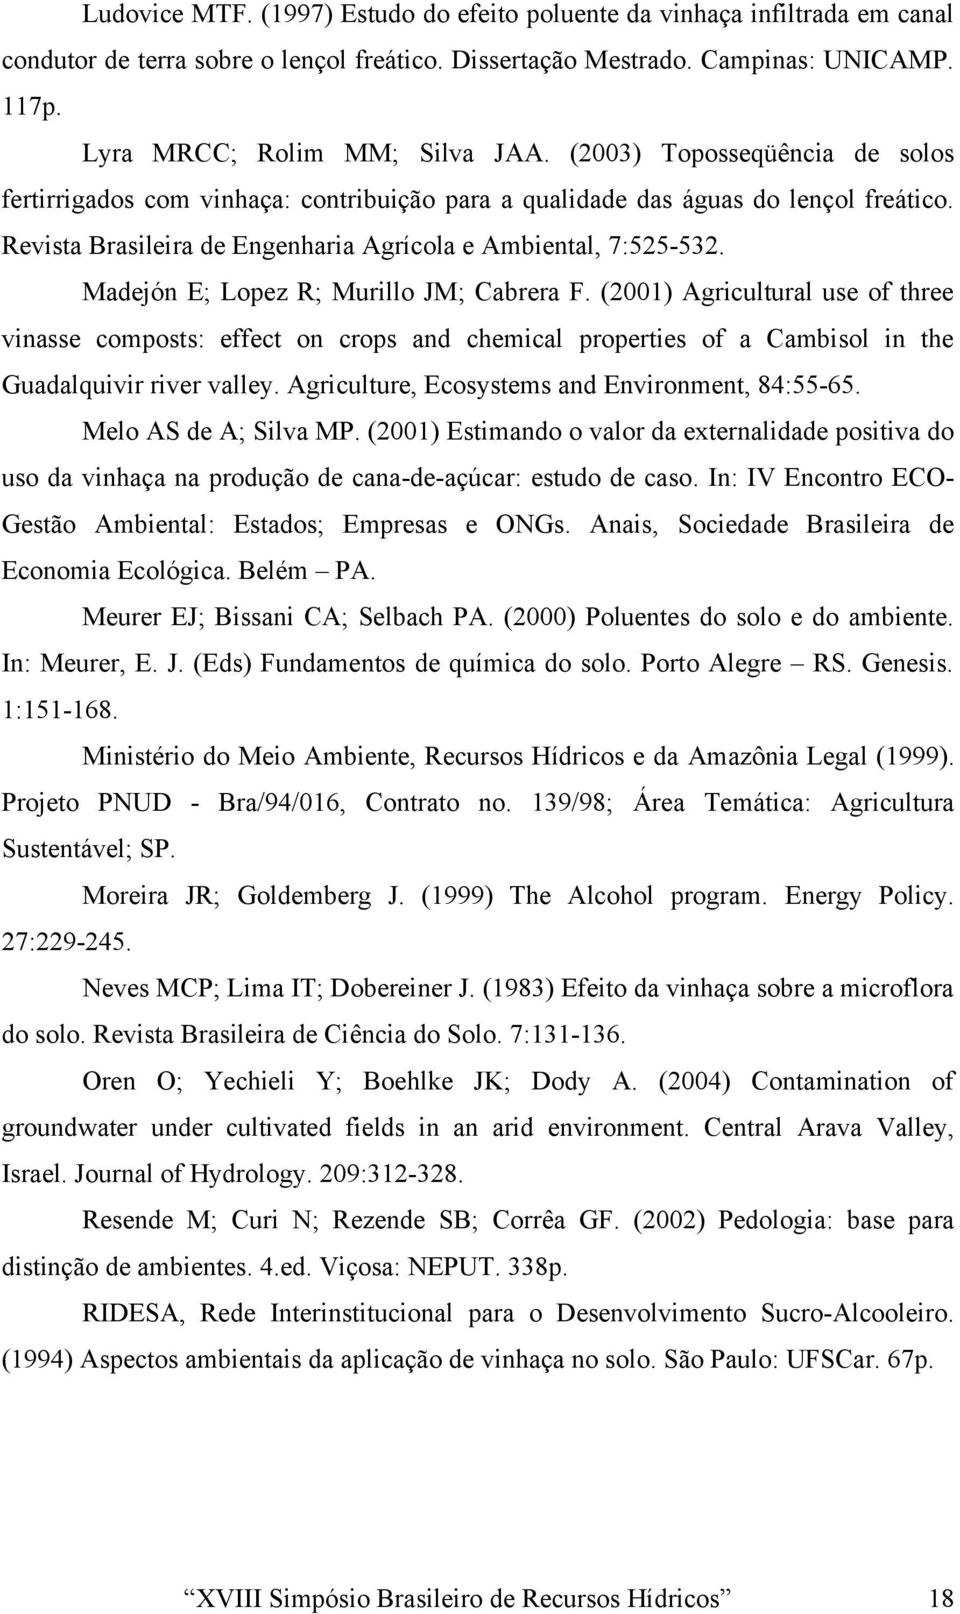 Madejón E; Lopez R; Murillo JM; Cabrera F. (2001) Agricultural use of three vinasse composts: effect on crops and chemical properties of a Cambisol in the Guadalquivir river valley.